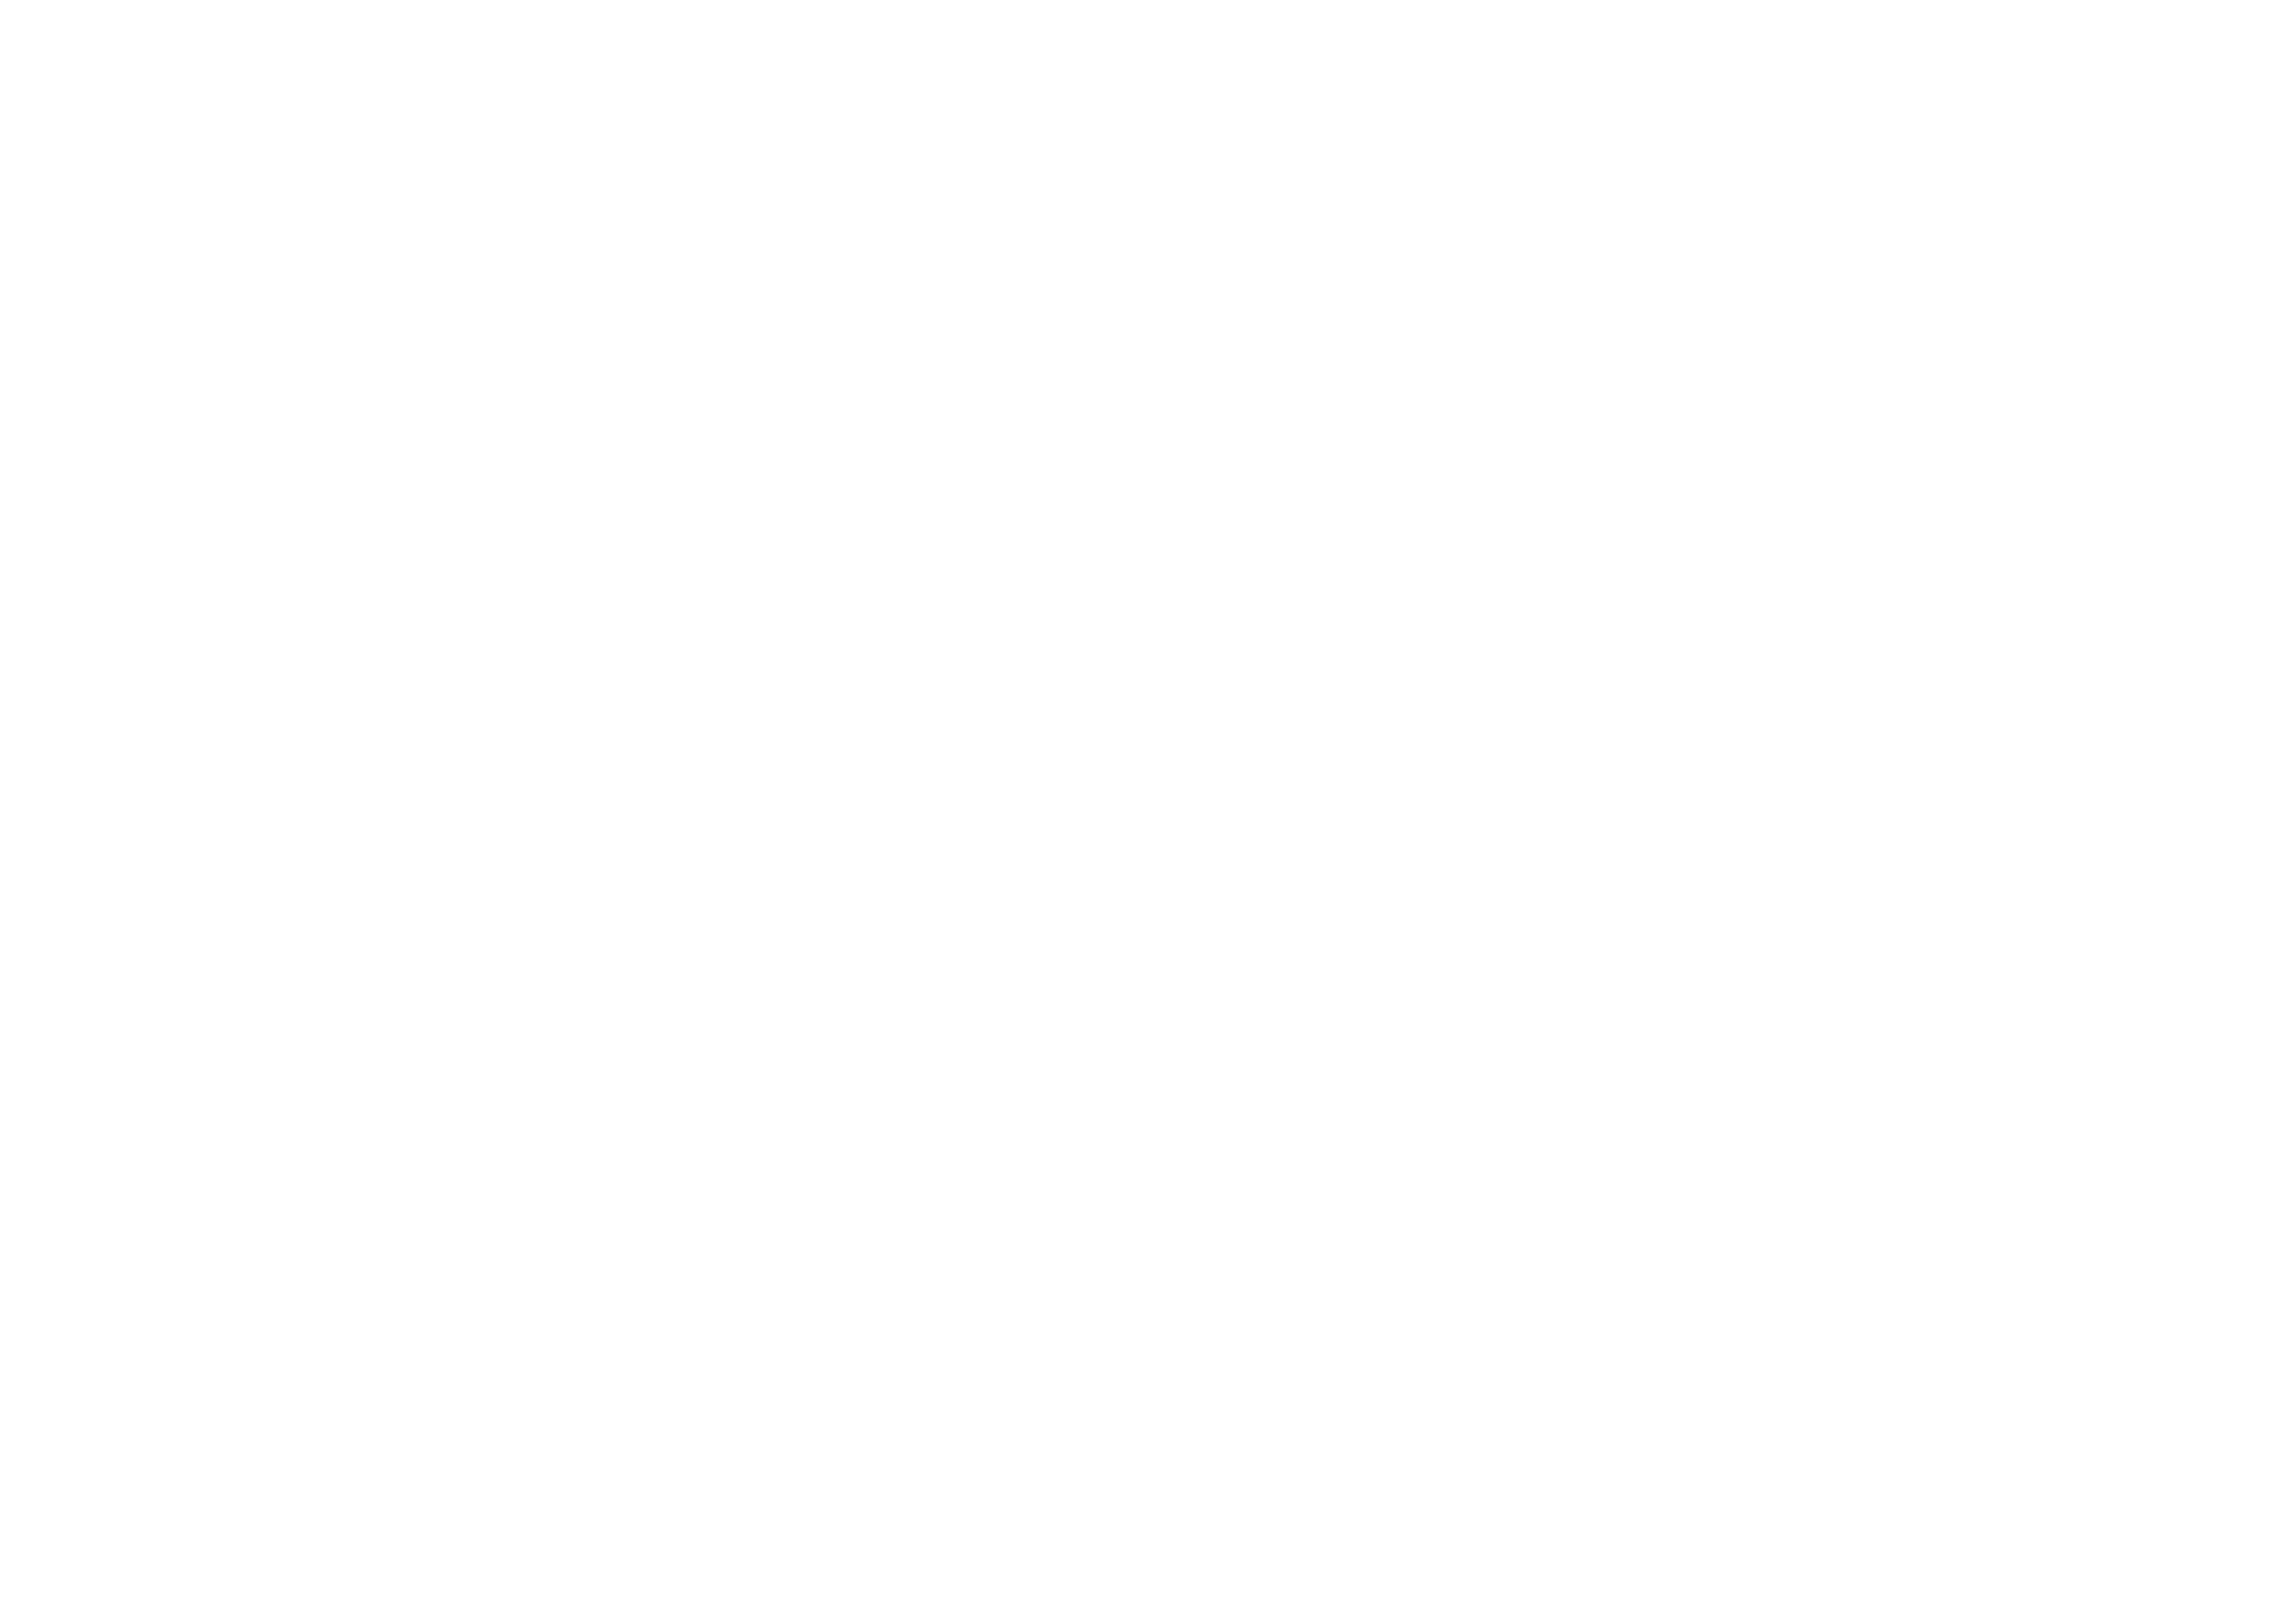 Ascent Agency